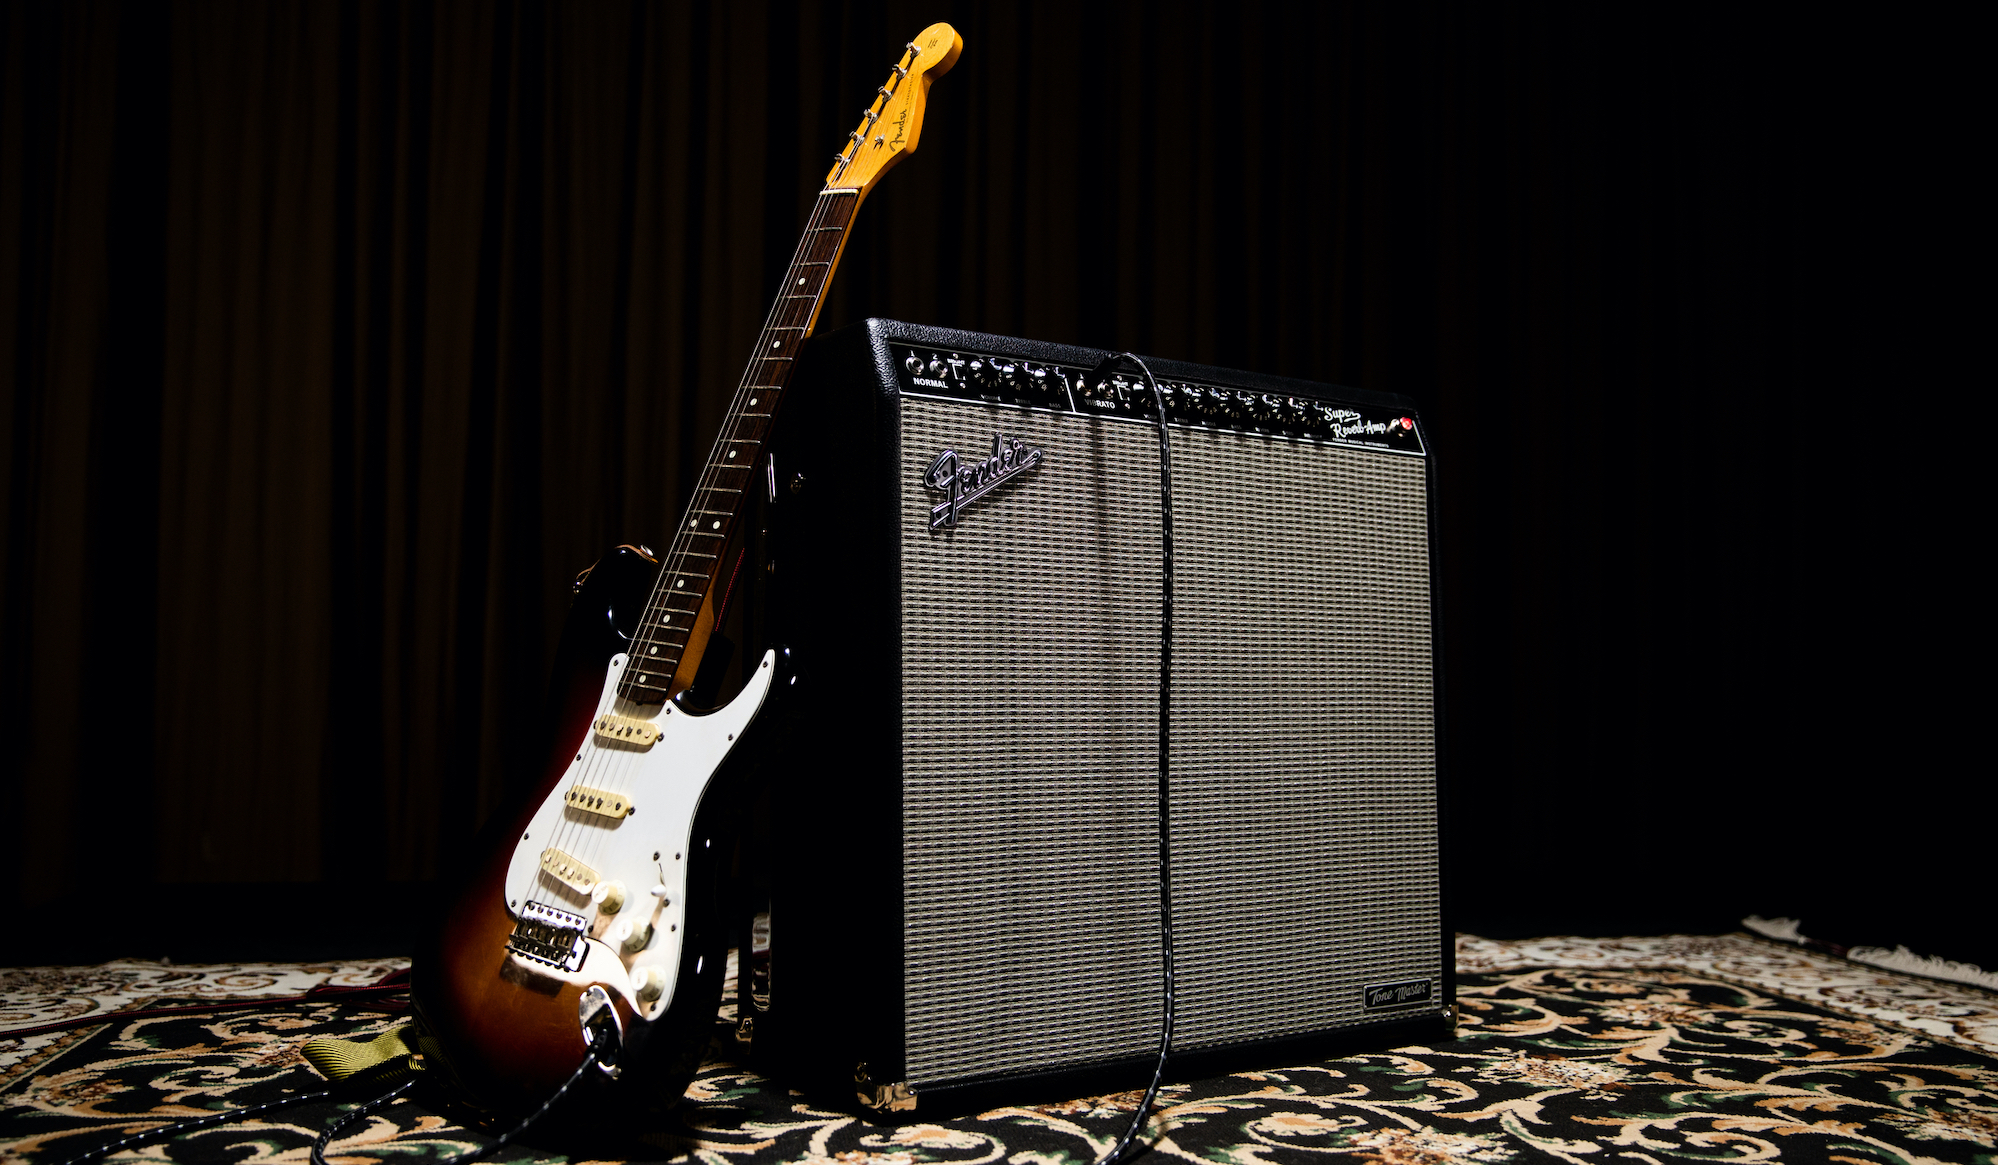 Fender adds to its Tone Master digital amp series with powerful 